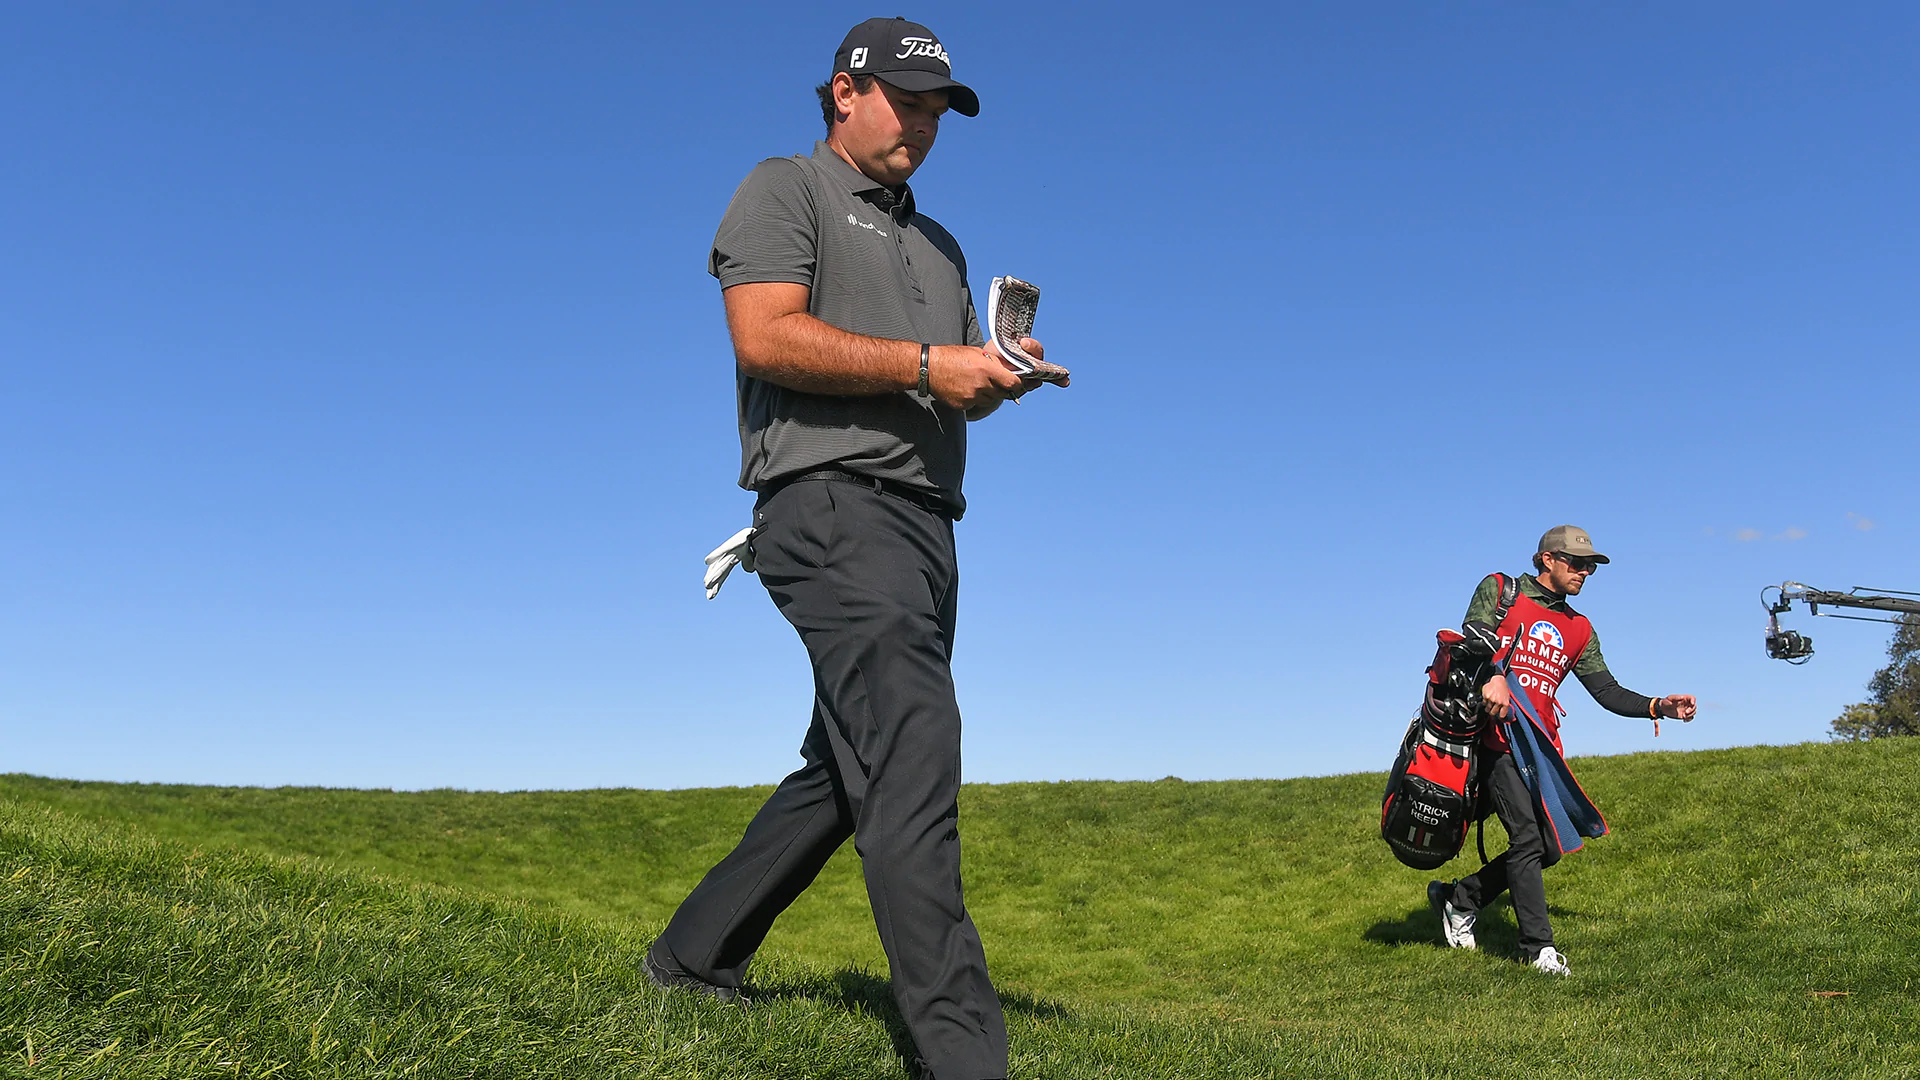 How it happened: A look at Patrick Reed’s controversial drop at Torrey Pines